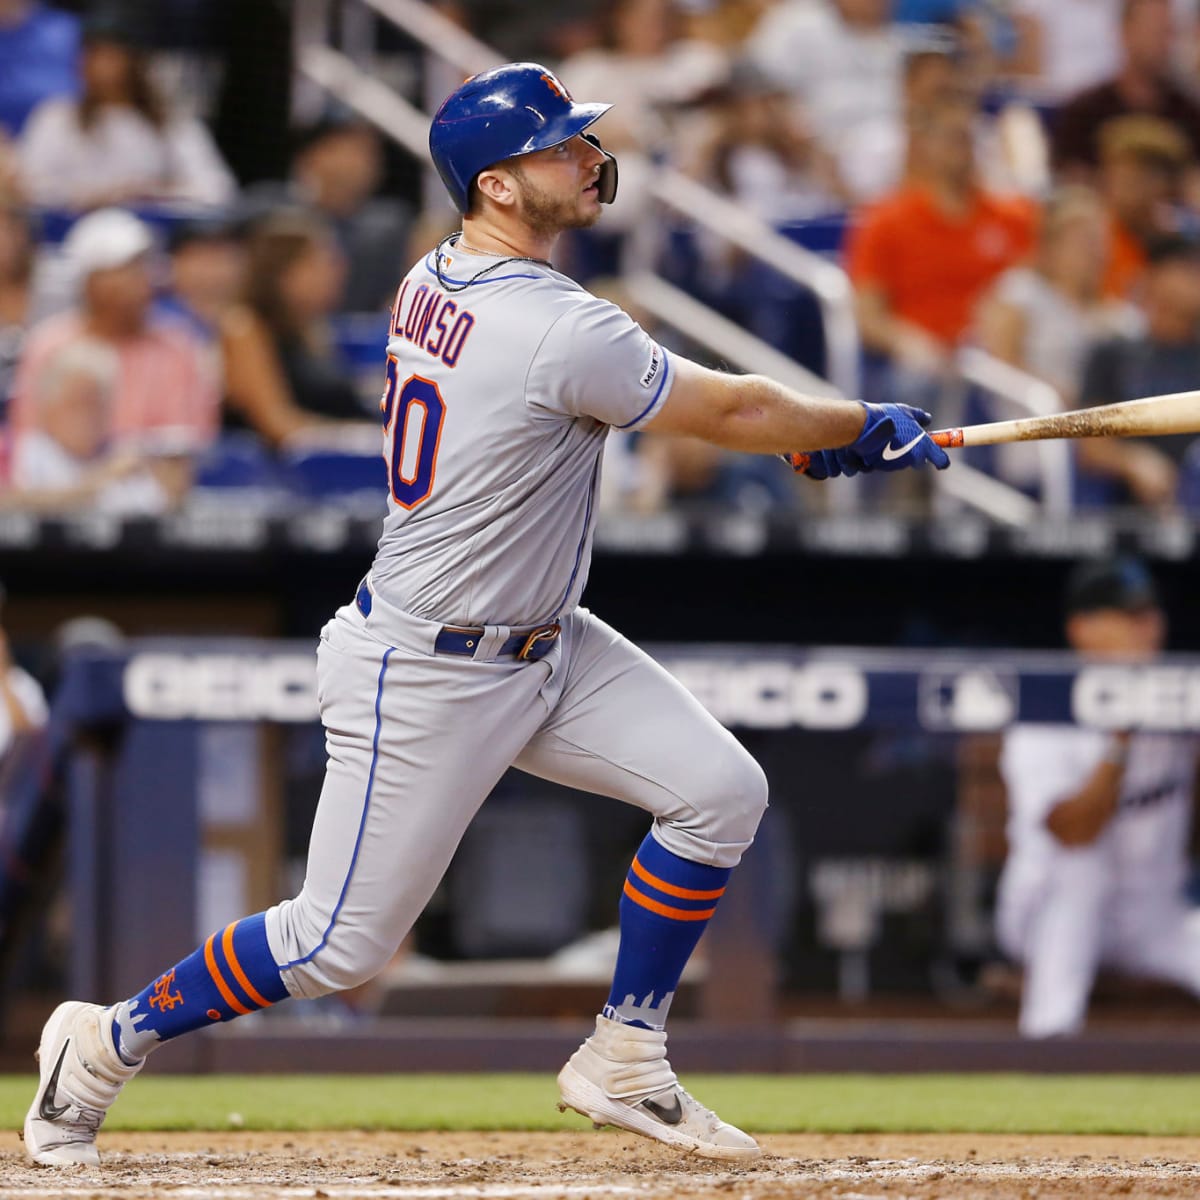 Tampa Bay's Own Pete Alonso of NY Mets to Host Inaugural Battle